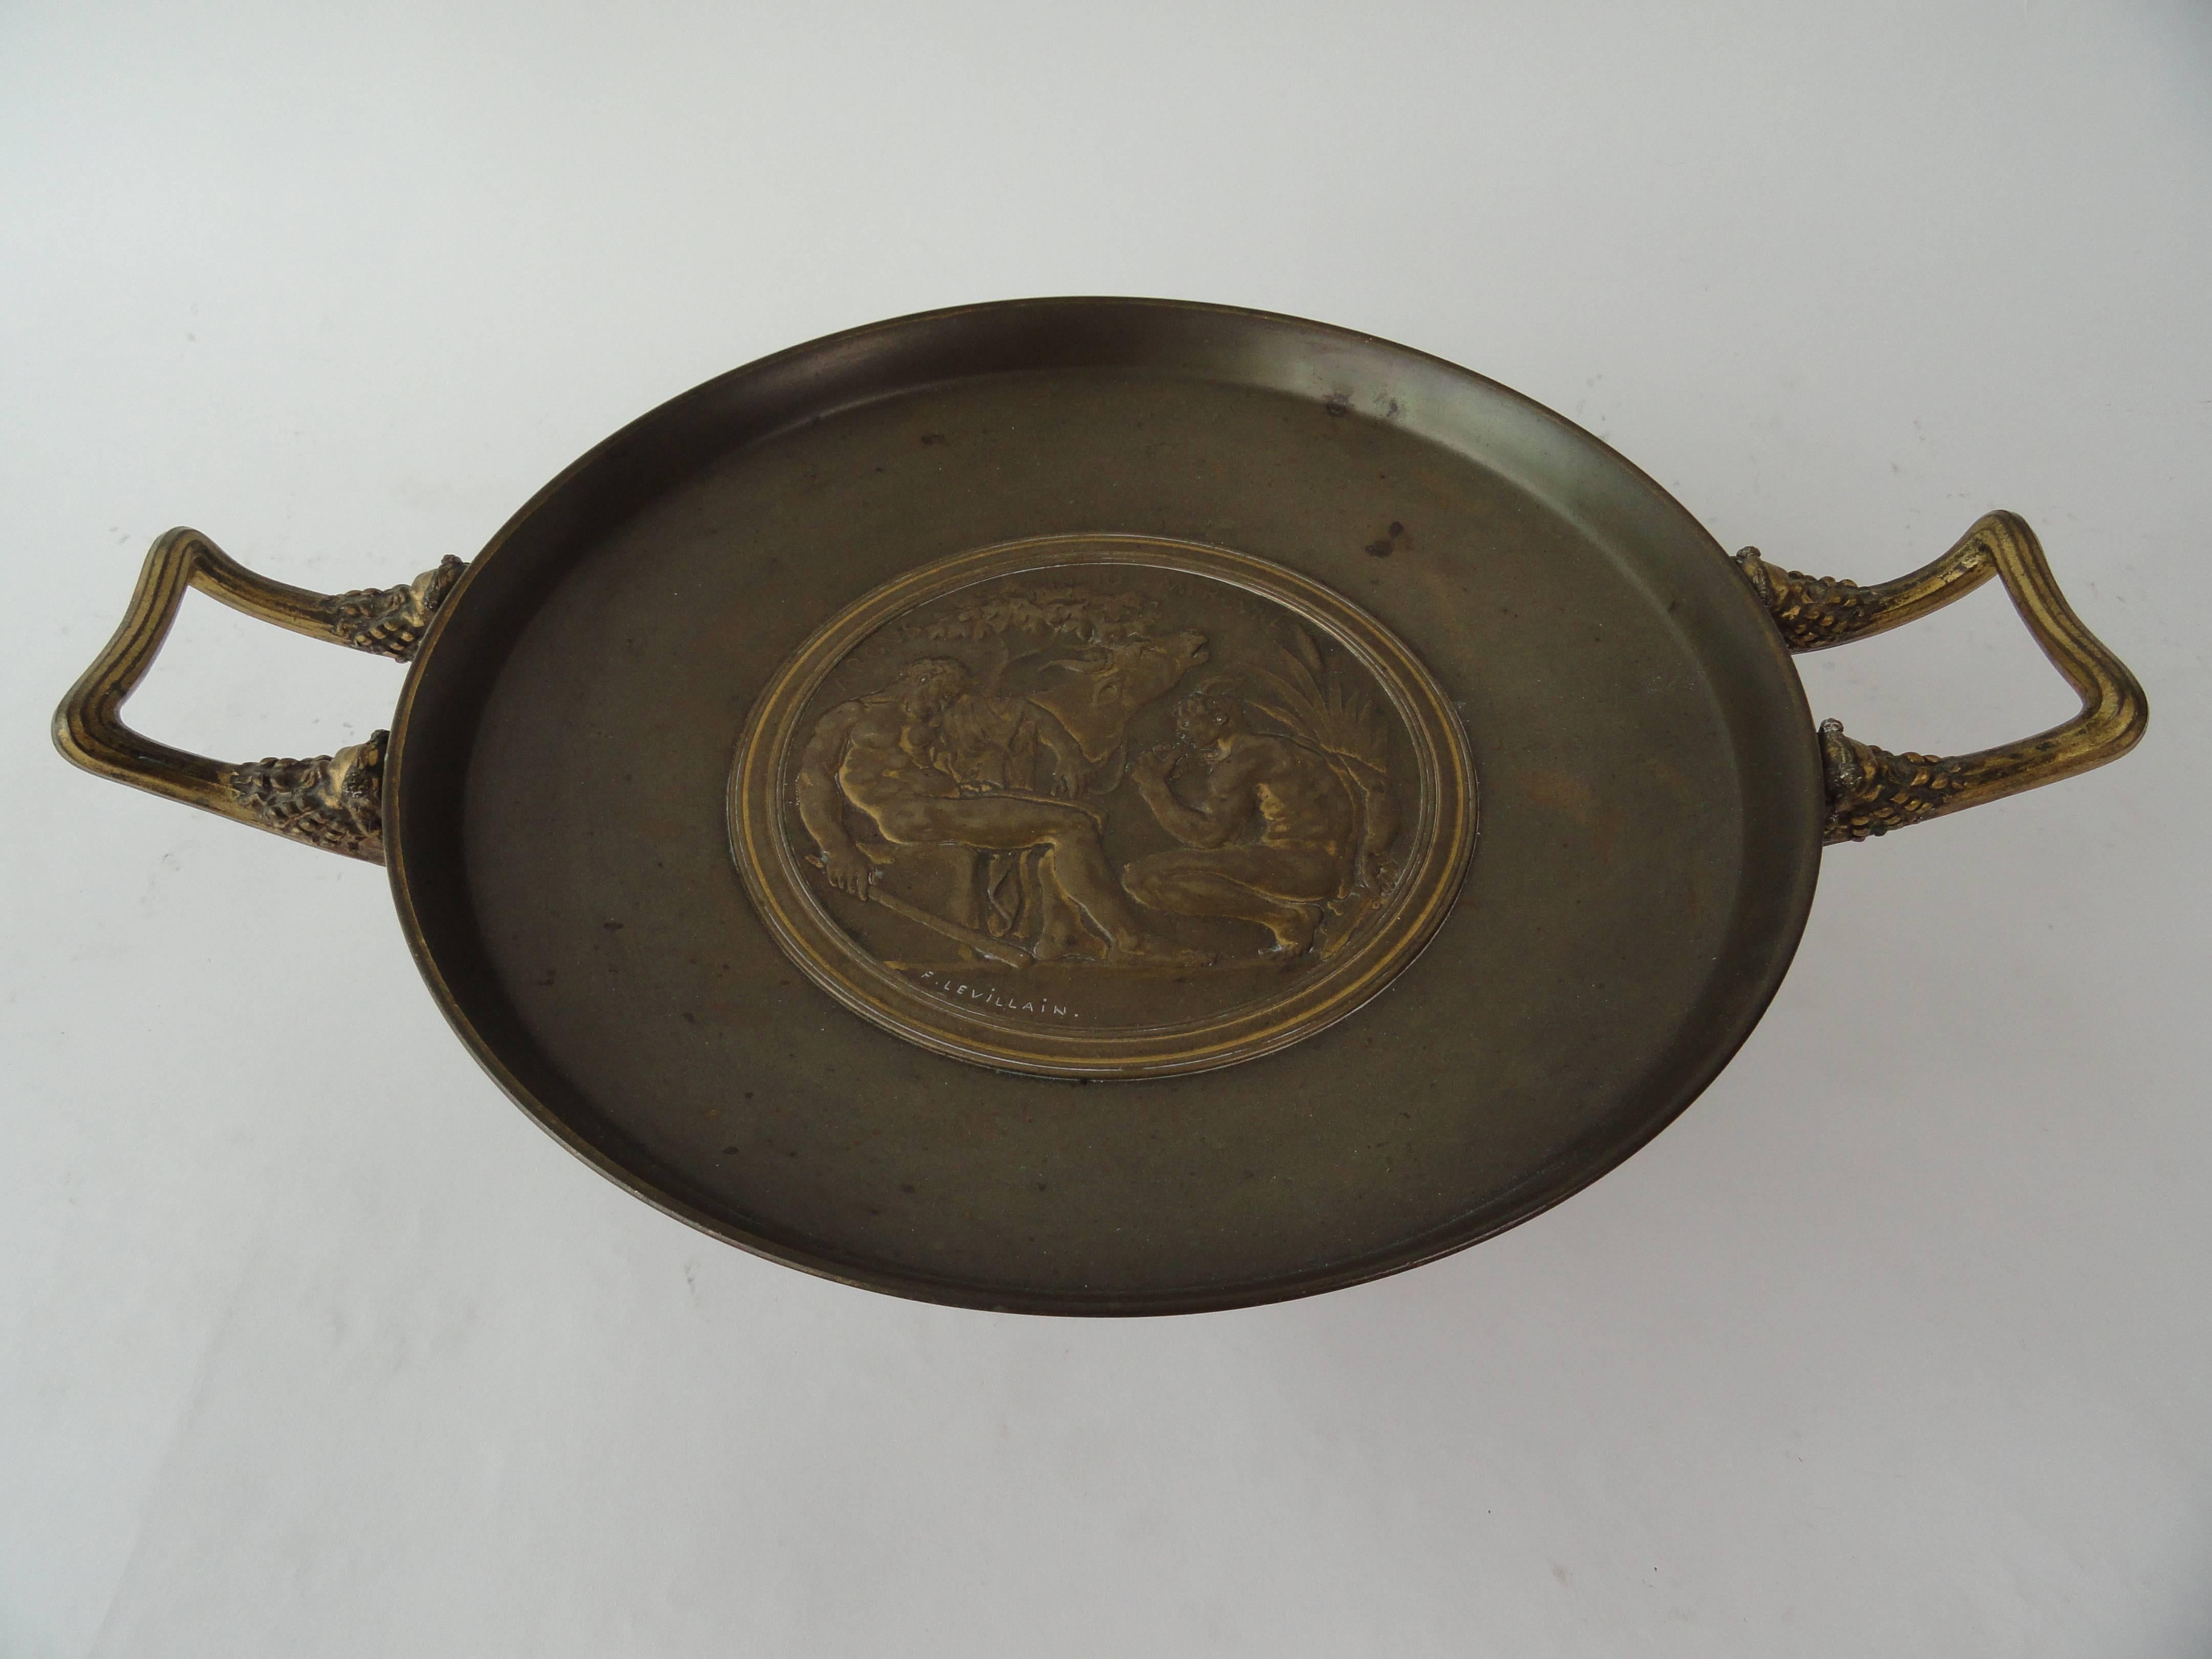 Ferdinand Levillain (1837-1905) and Ferdinand Barbedienne (1810-1892), bronze tazza, 19th century French.
Designed by Levillain and signed in the casting, marked F. Bardedienne, on underside of tazza.
Large round centrepiece, in the centre with